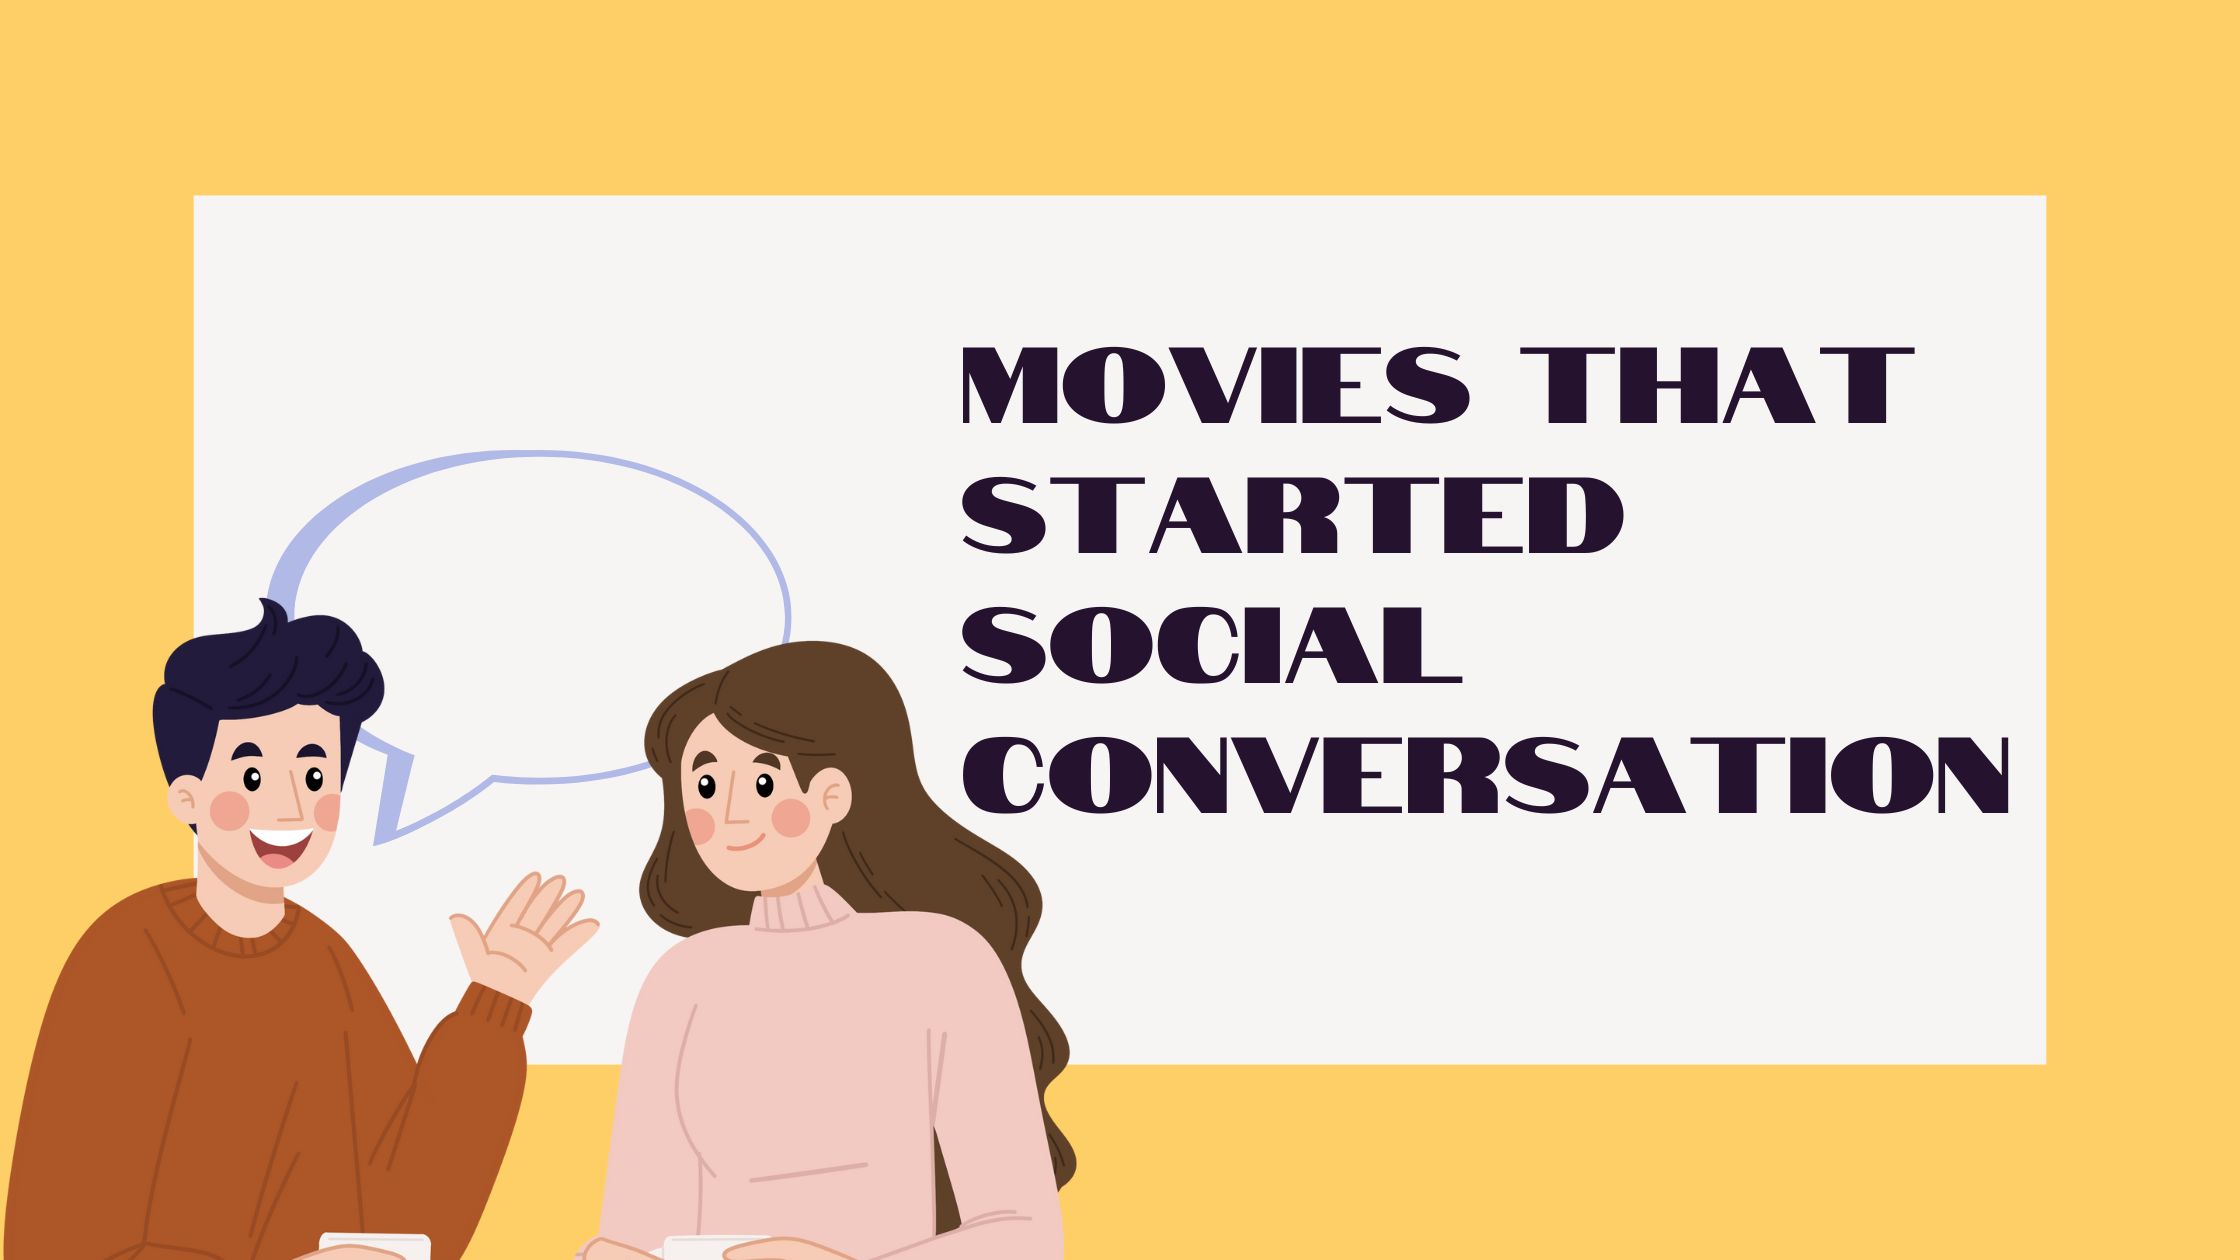 Movies that Started Social Conversation